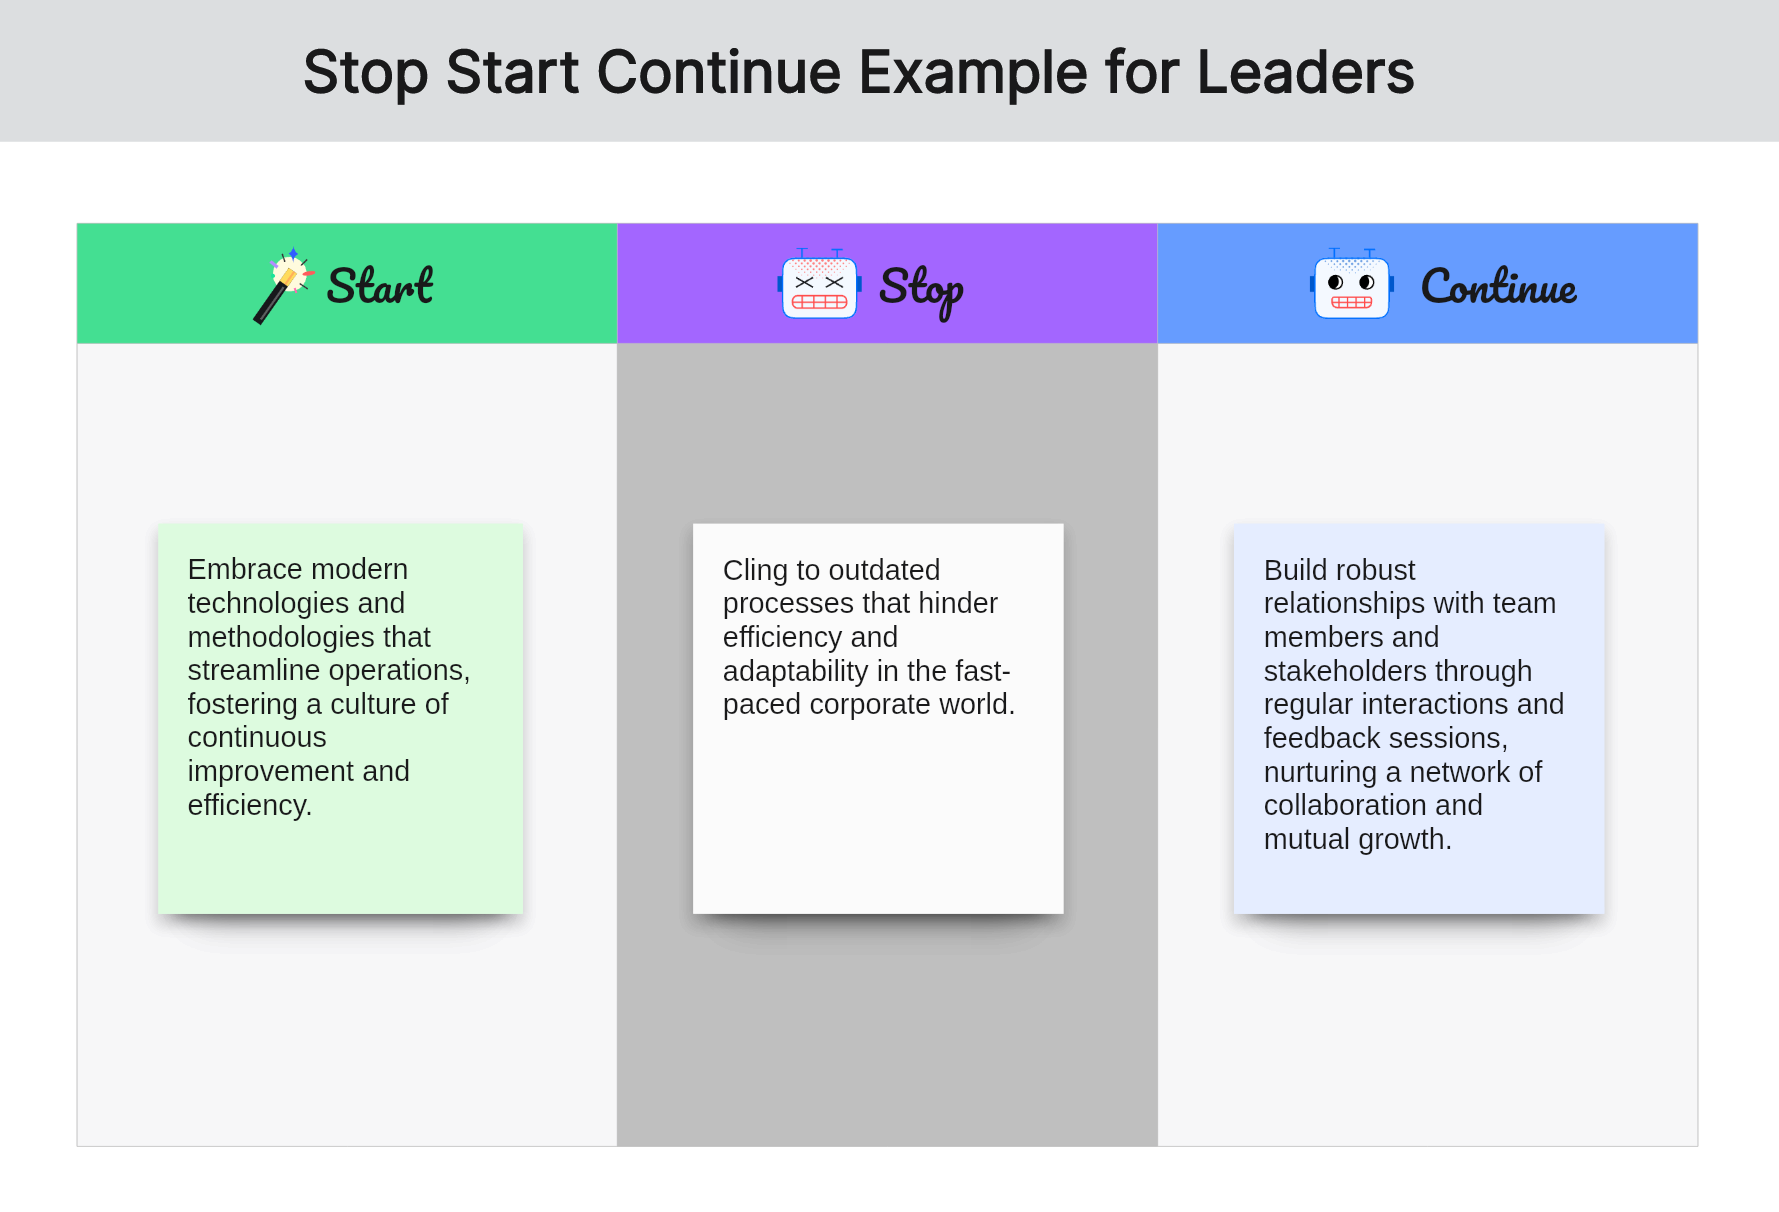 start-stop-continue-examples-for-leaders-03